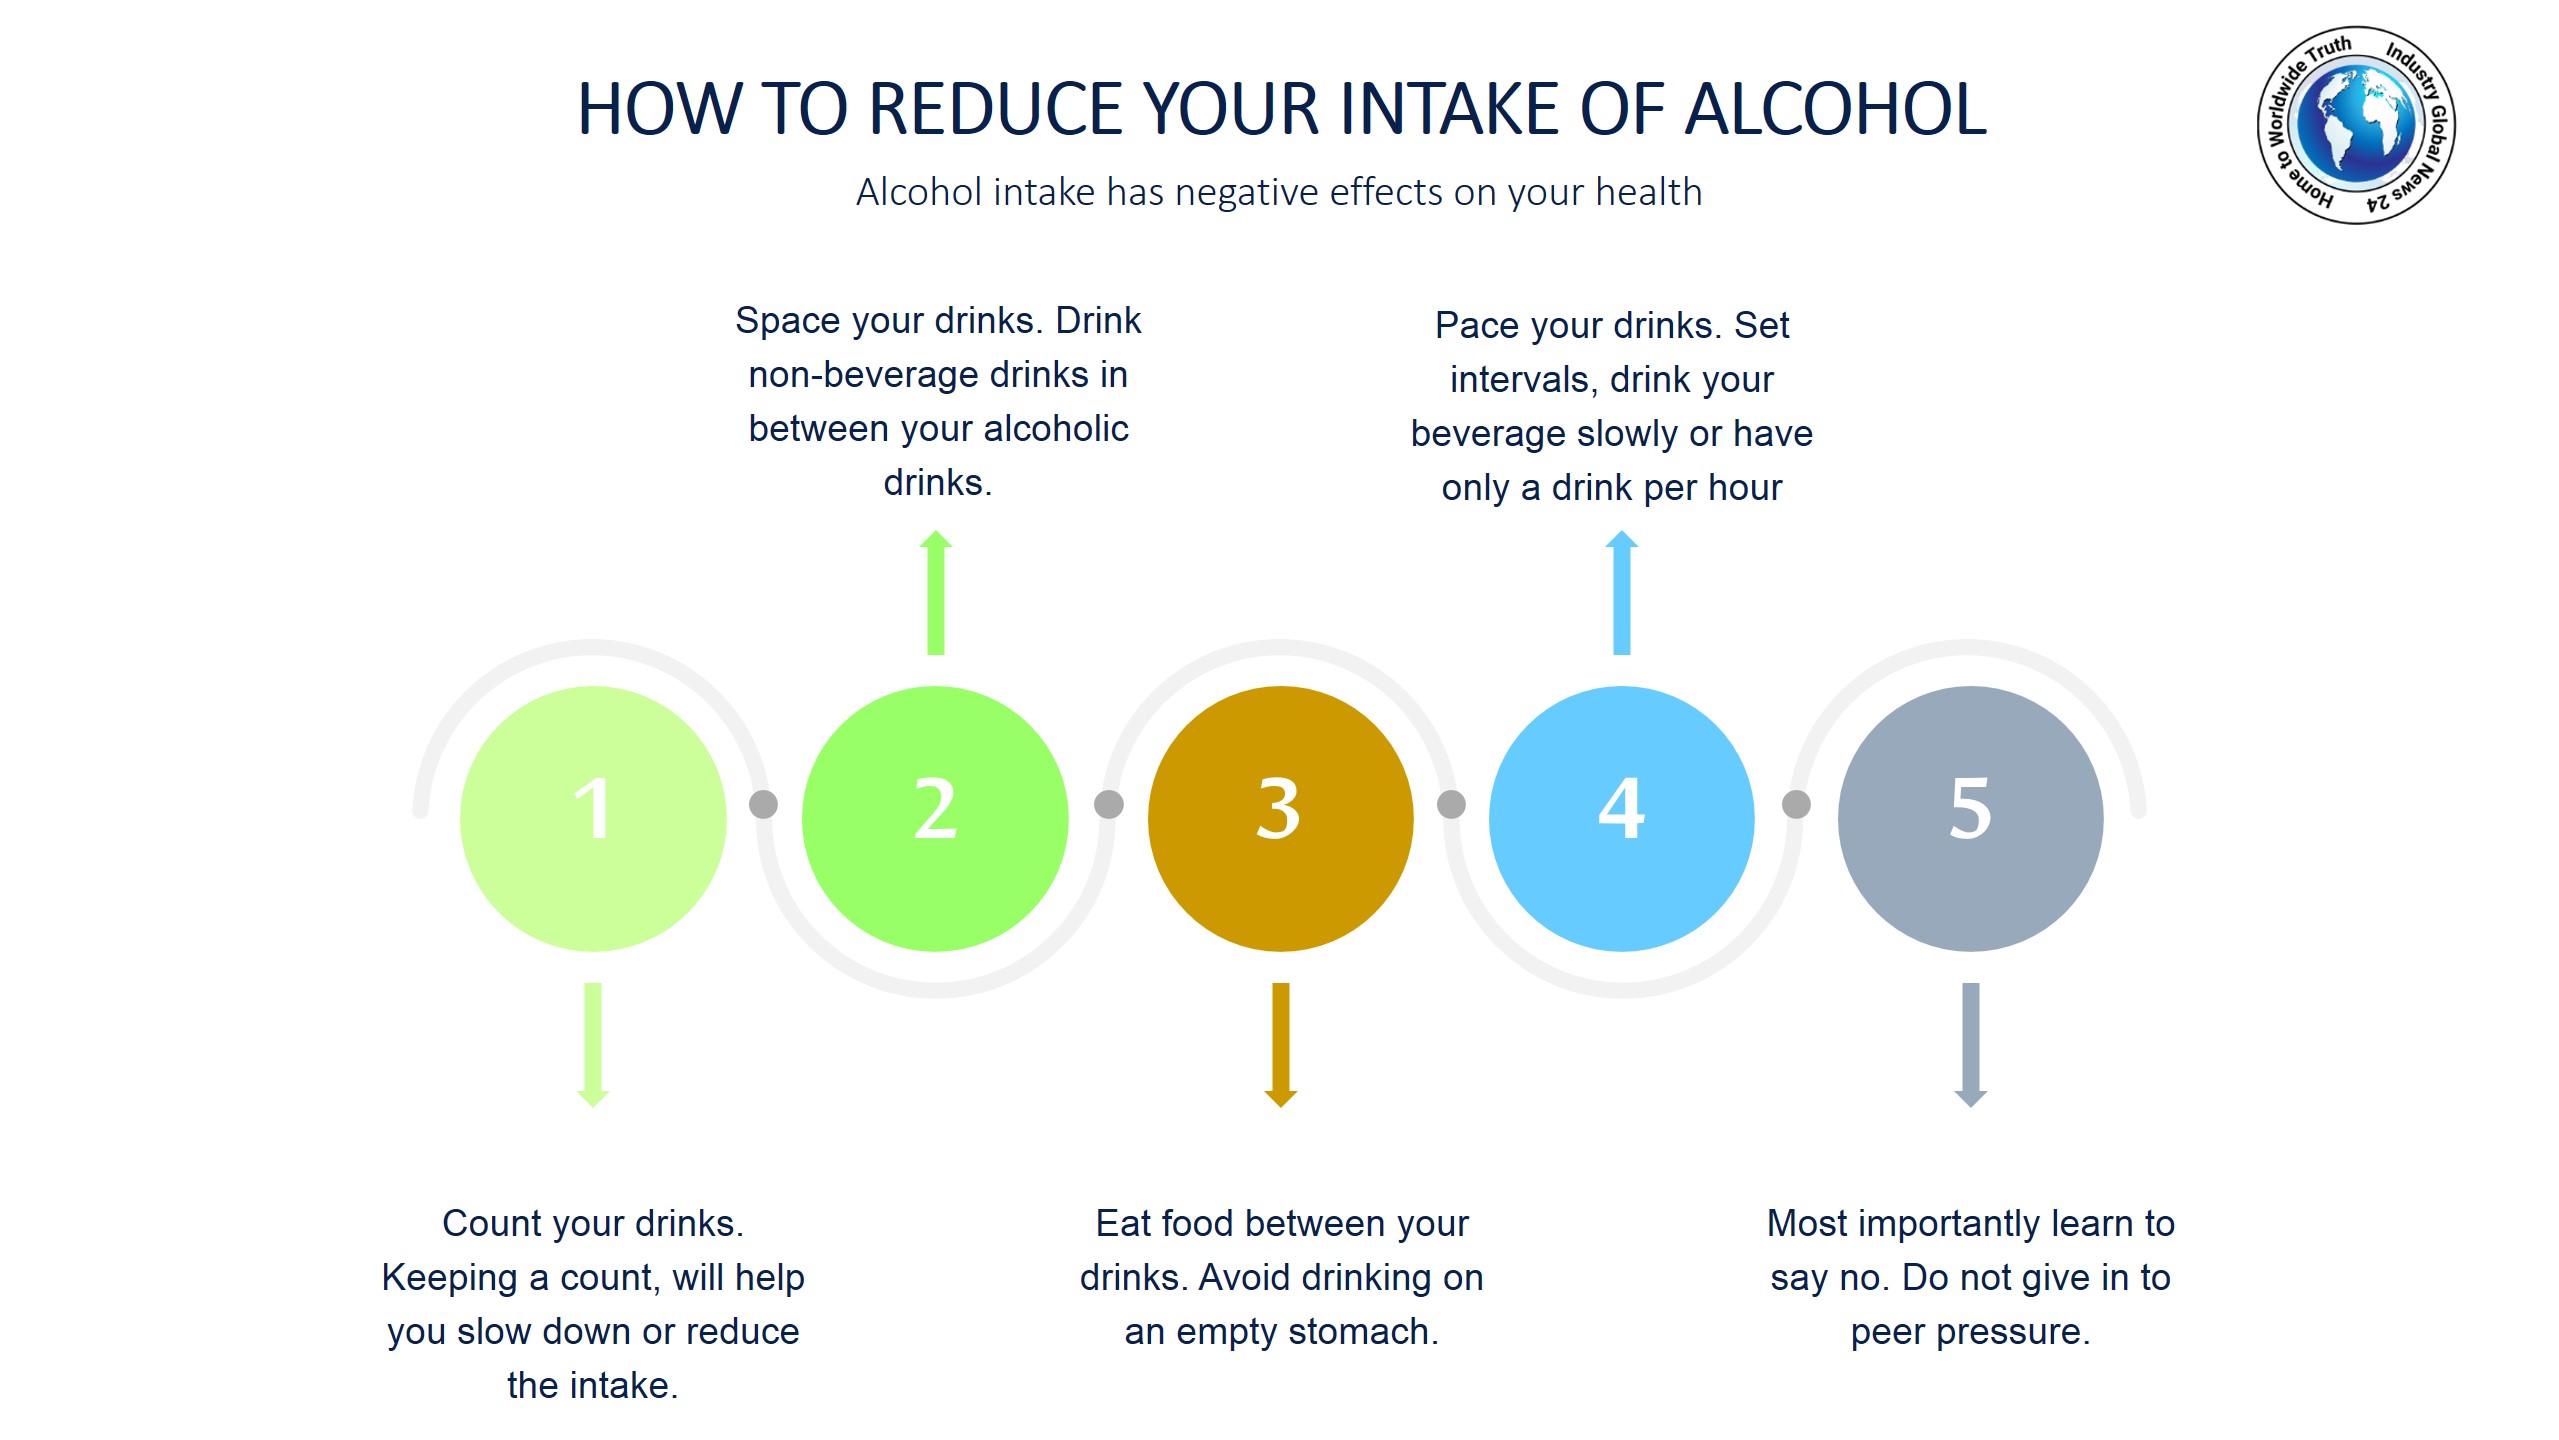 How to reduce your intake of alcohol